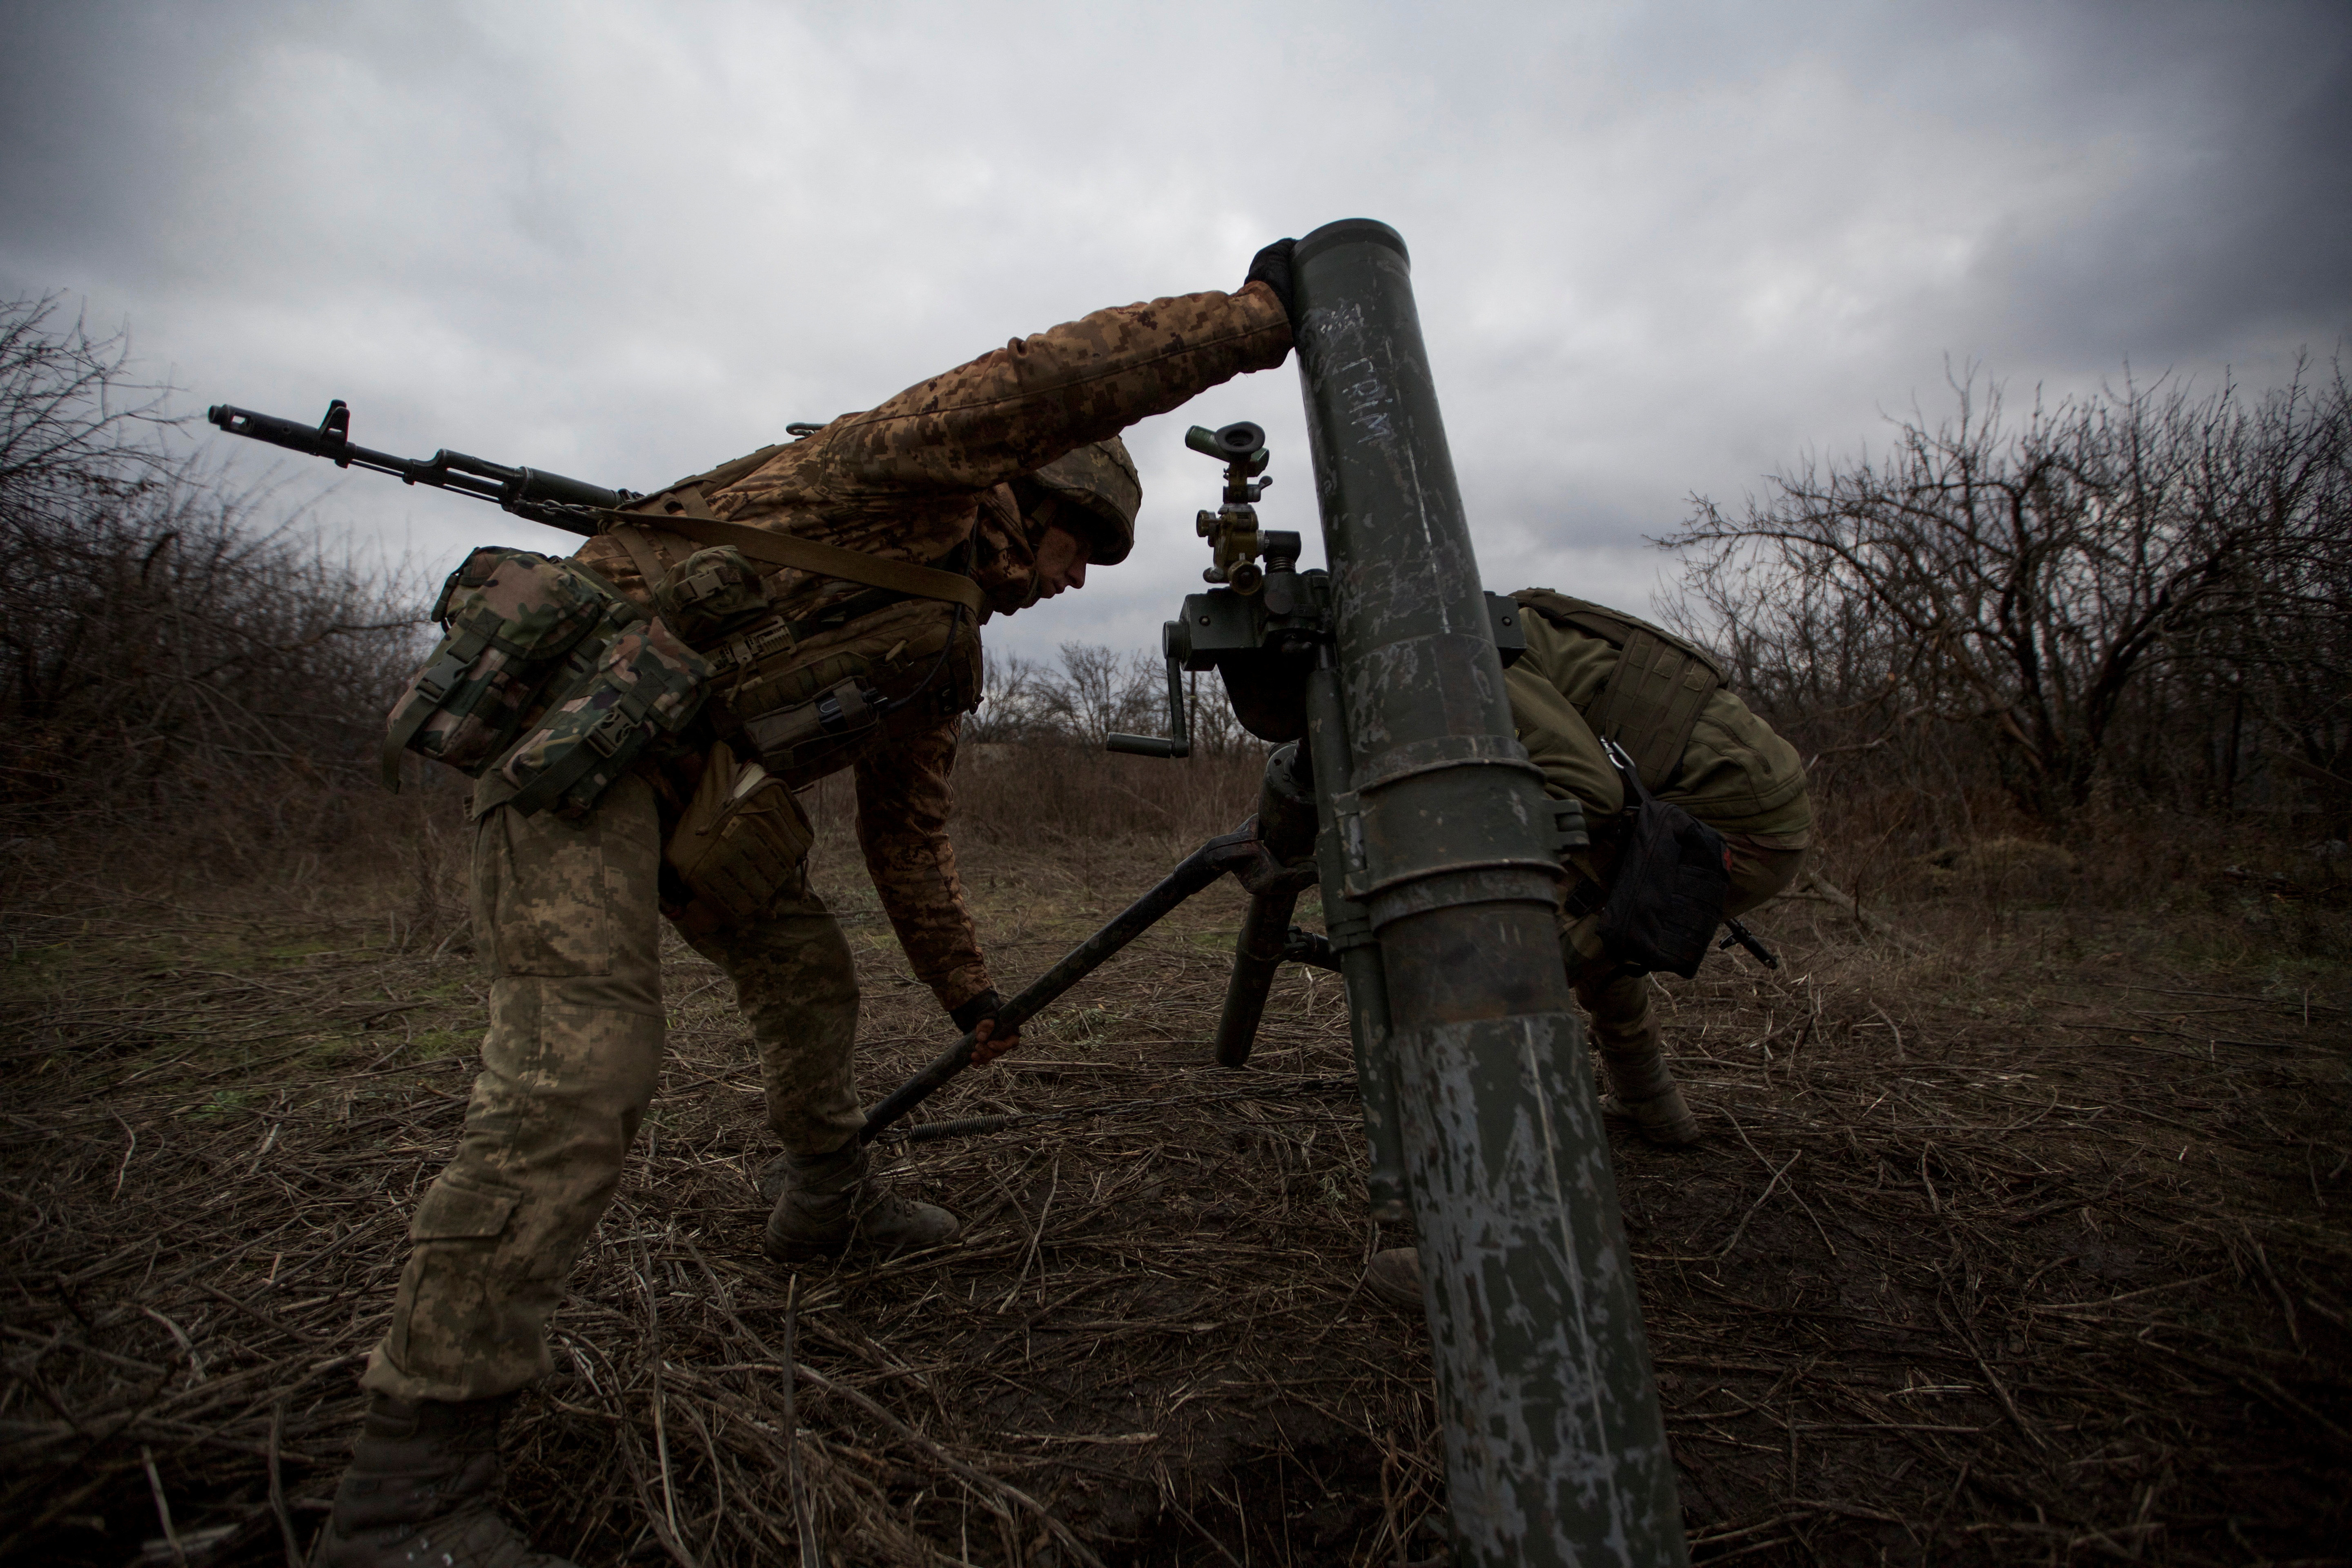 Ukrainian servicemen set up a mortar for firing it towards positions of Russian troops, in the outskirts of Bakhmut